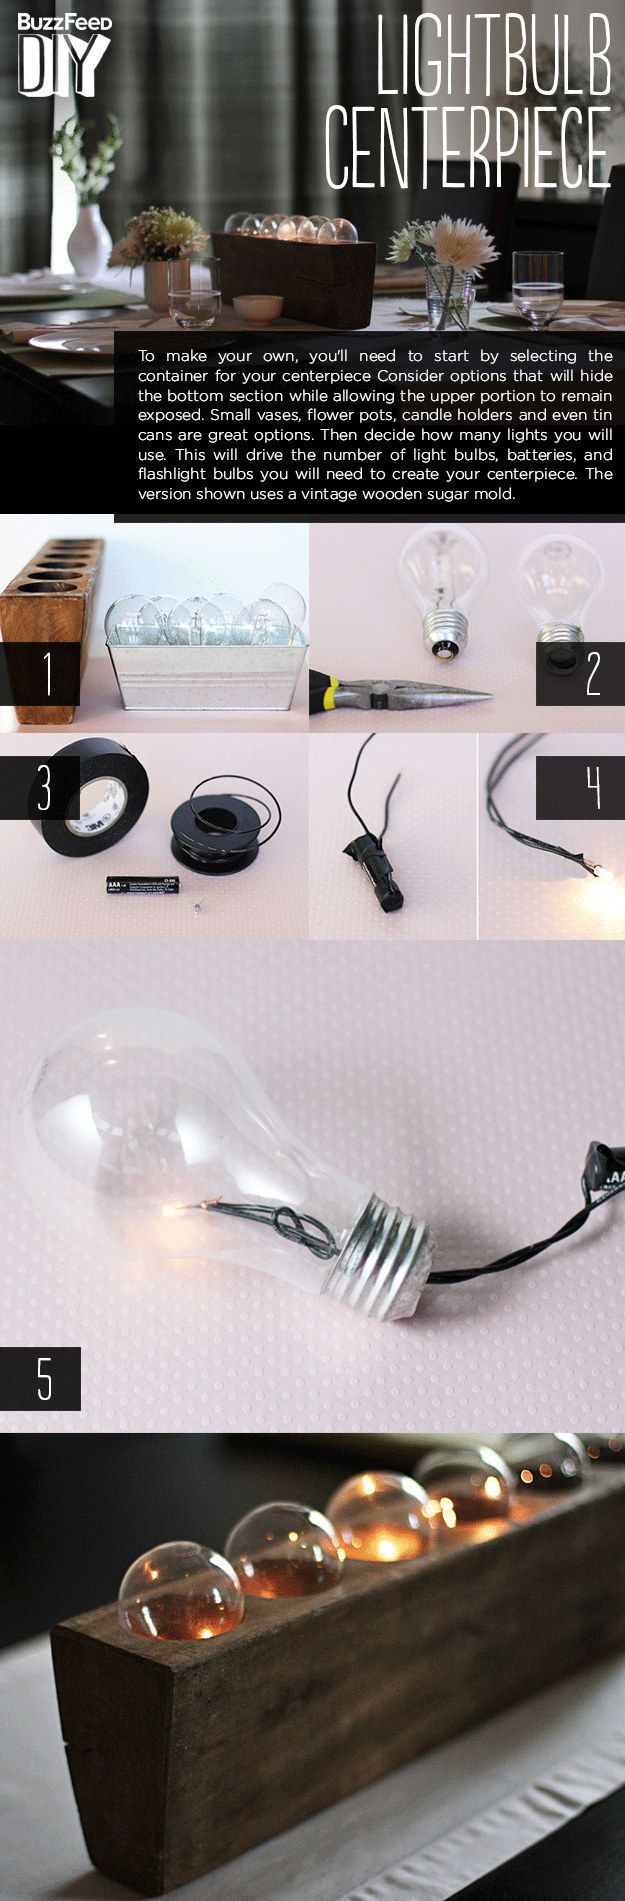 Having Fun With DIY Light Bulb Projects-usefuldiyprojects.com (6)